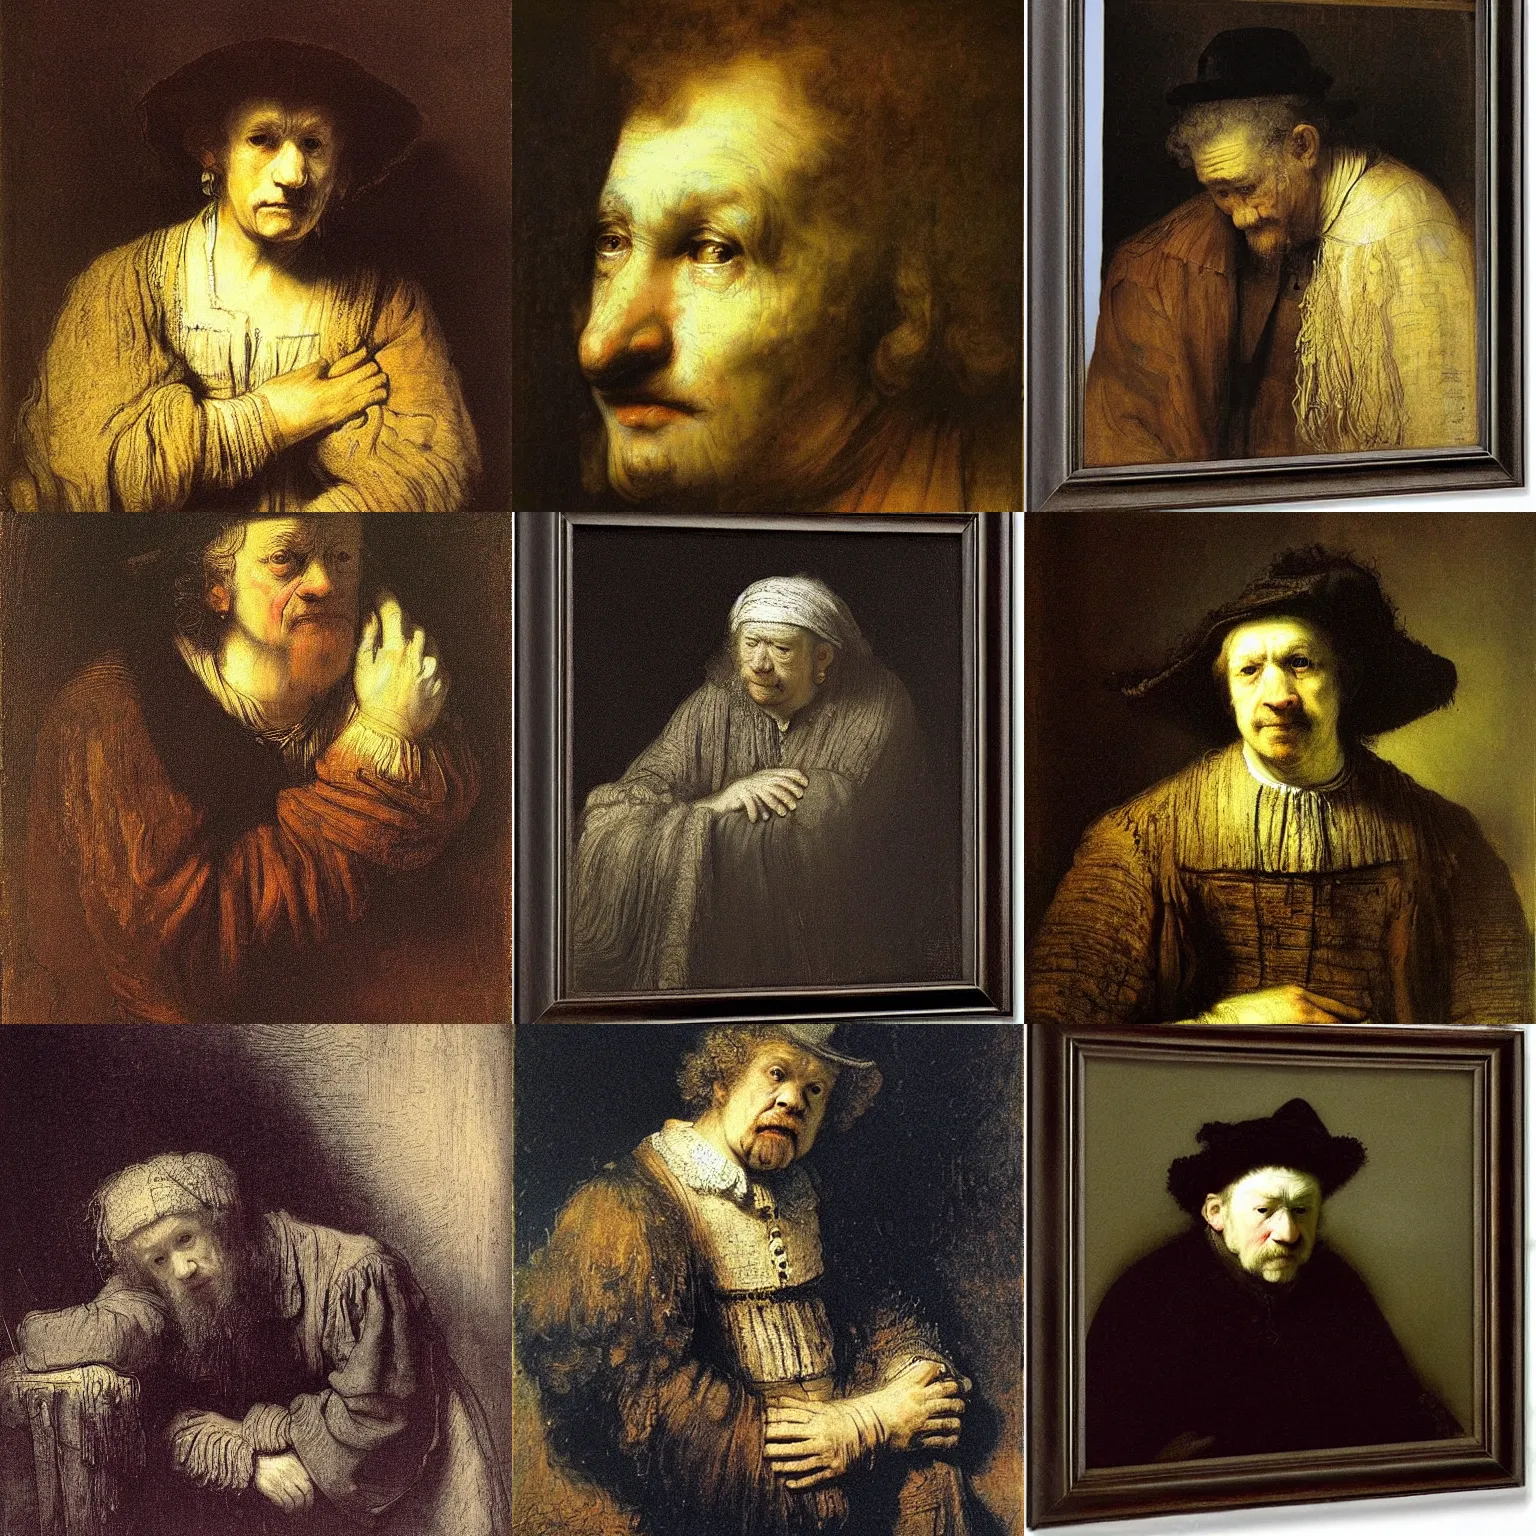 Prompt: the sadness by rembrandt